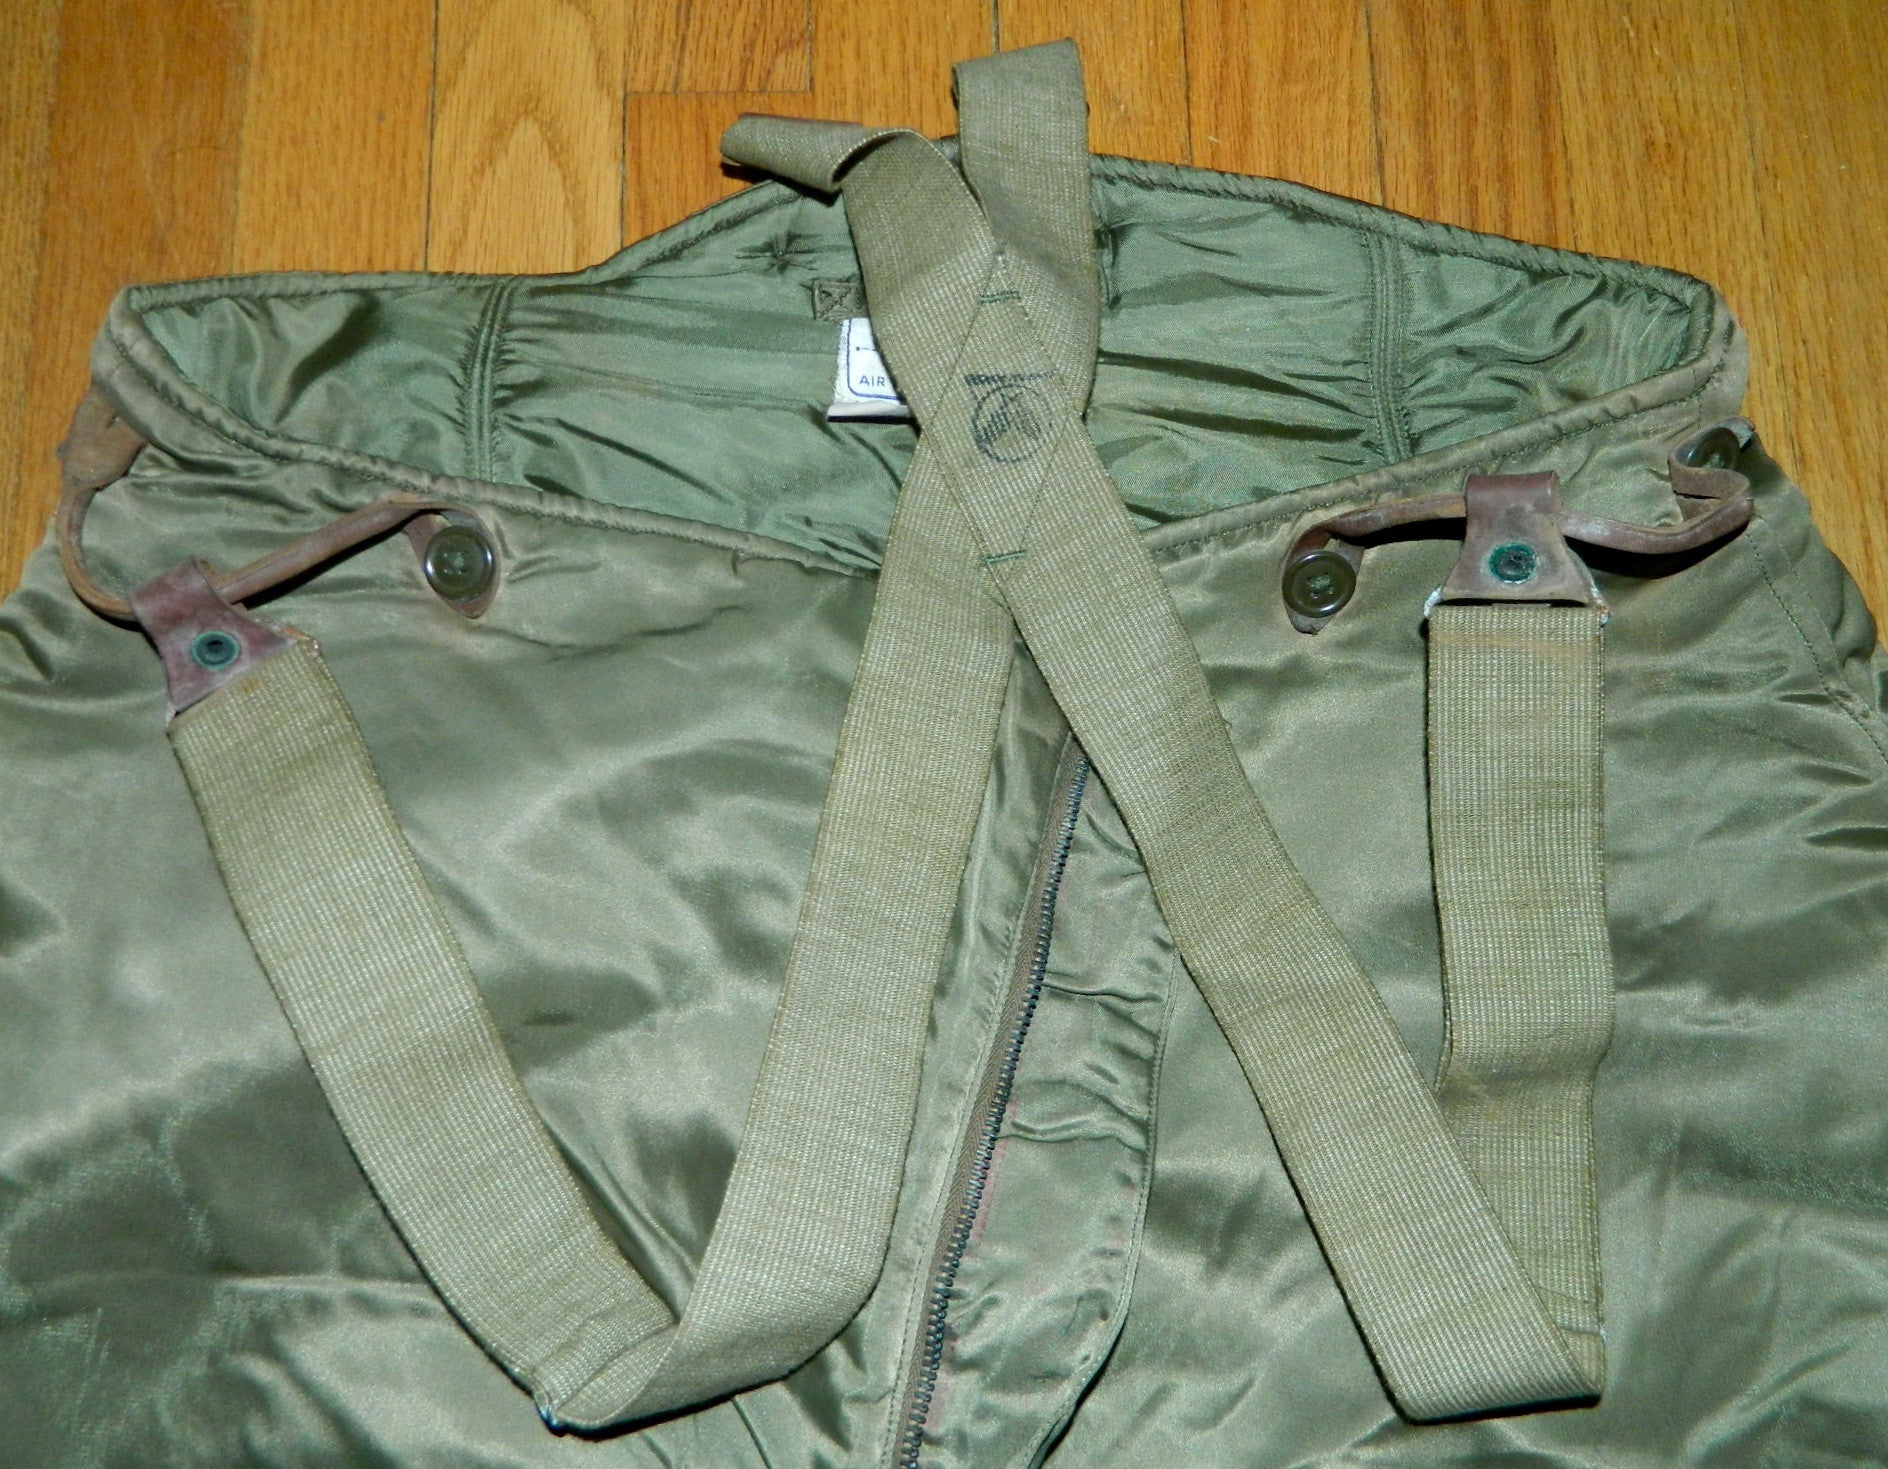 vintage 1940s Air Force arctic test pants / cold weather Ladd Field AFB US Military WWII USAAF